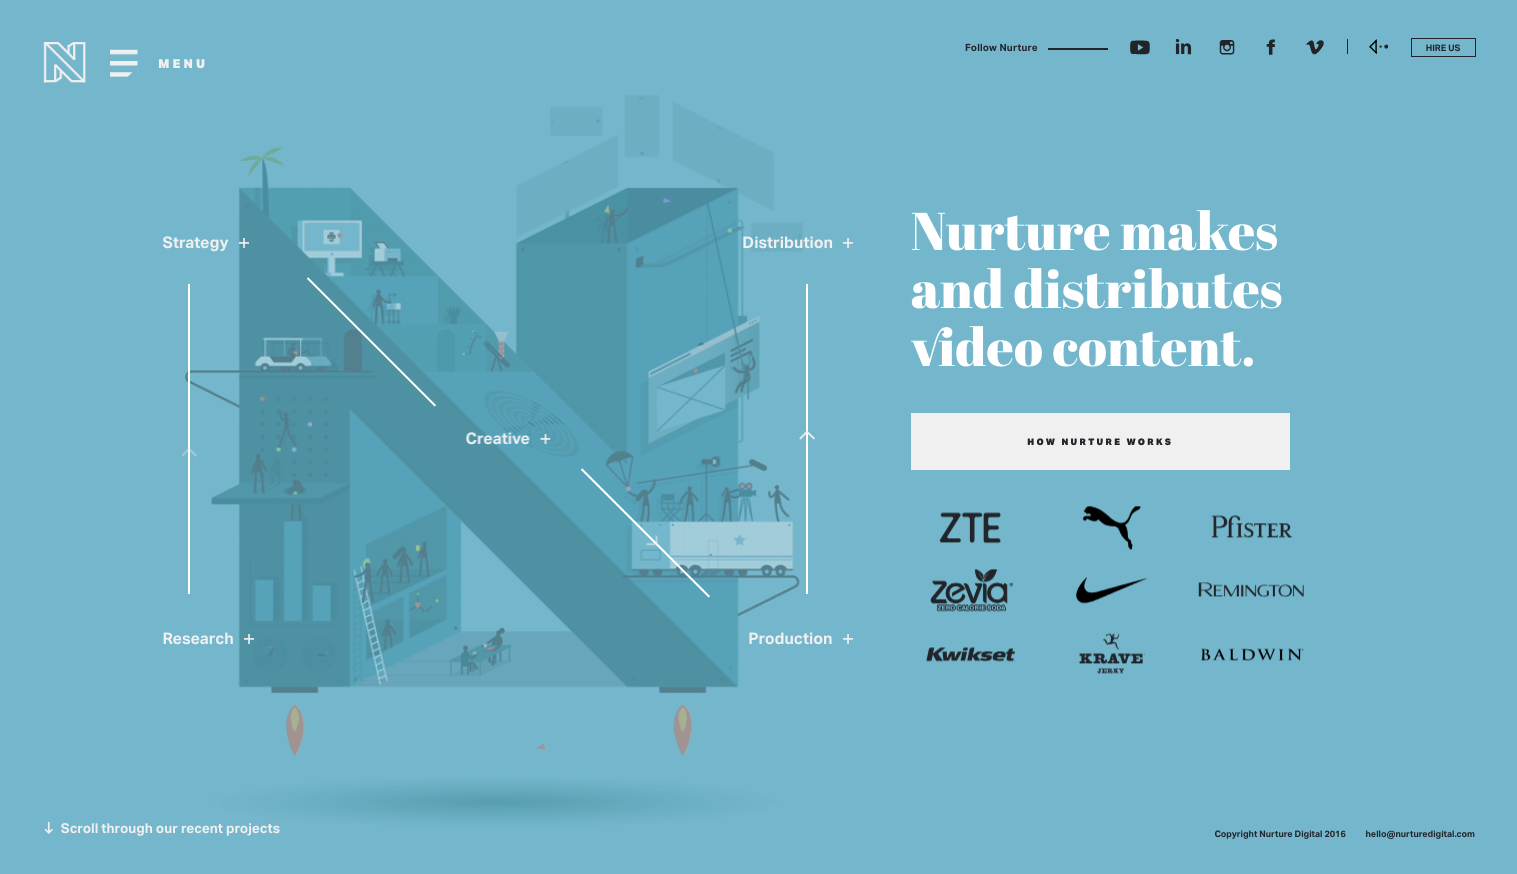 Nurturedigital.com is a good website design example for its excellent use of typography